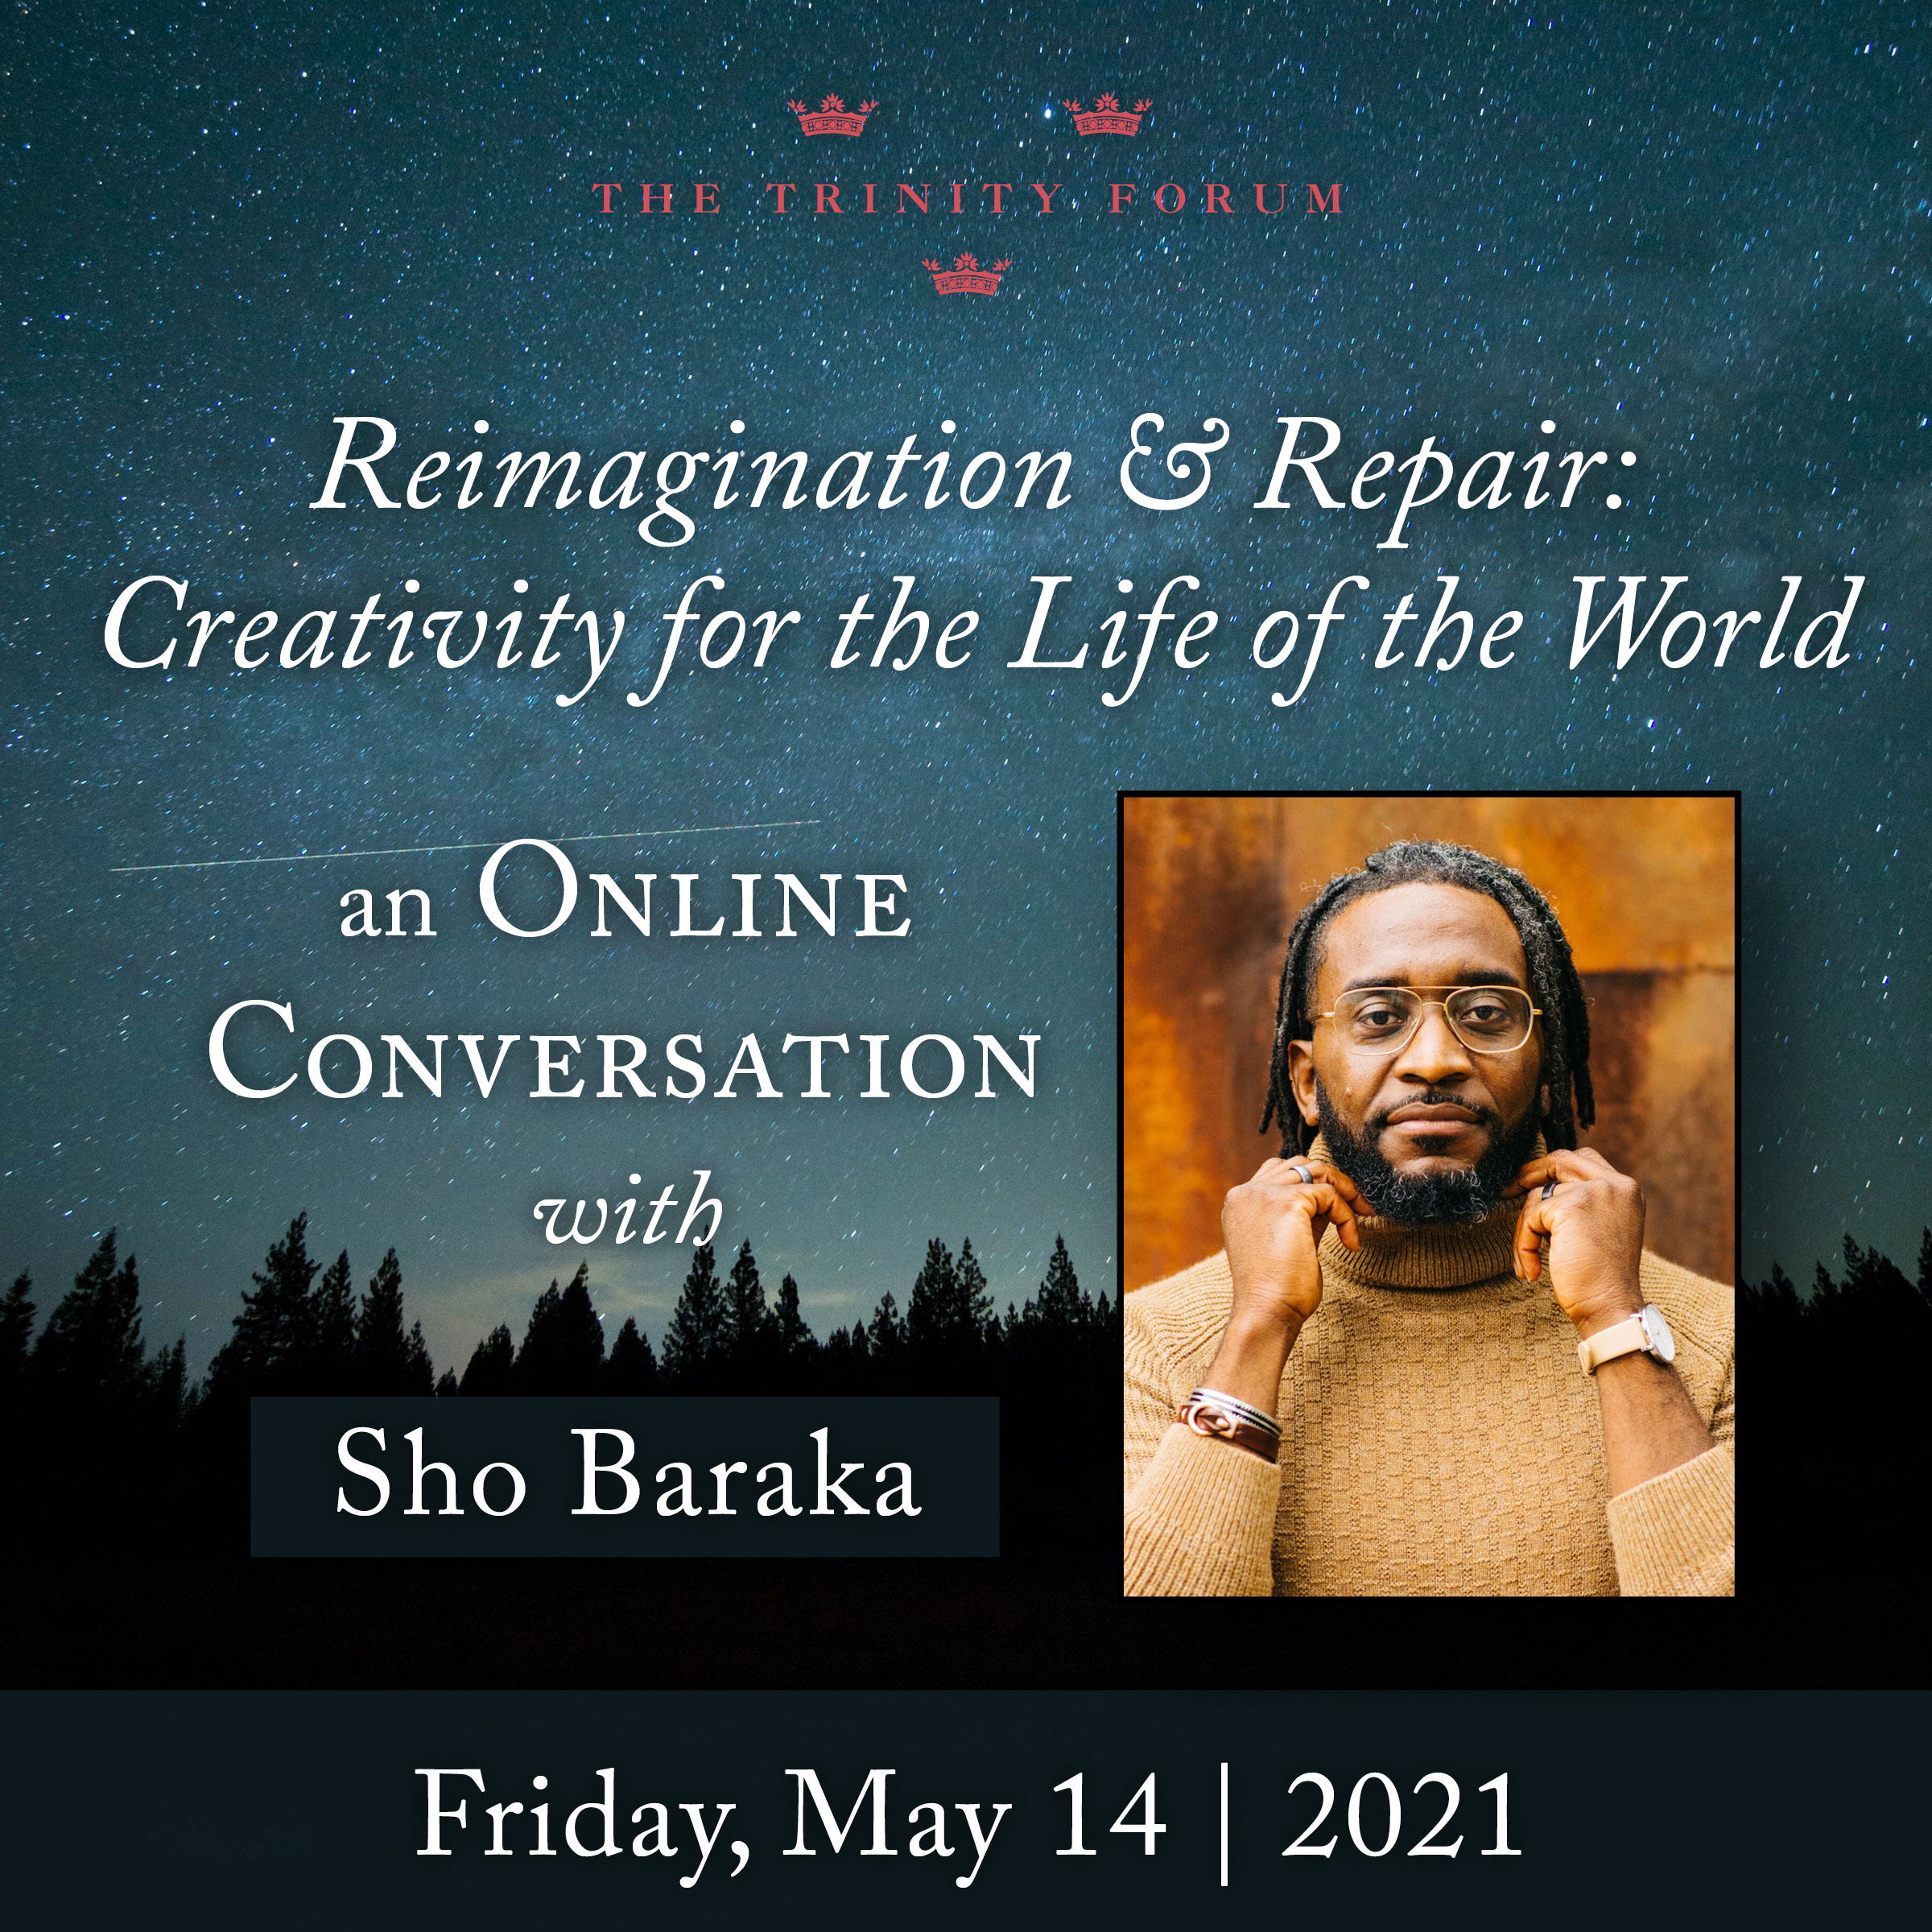 Online Conversation Reimagination and Repair Creativity for the Life of the World, with Sho Baraka The Trinity Forum